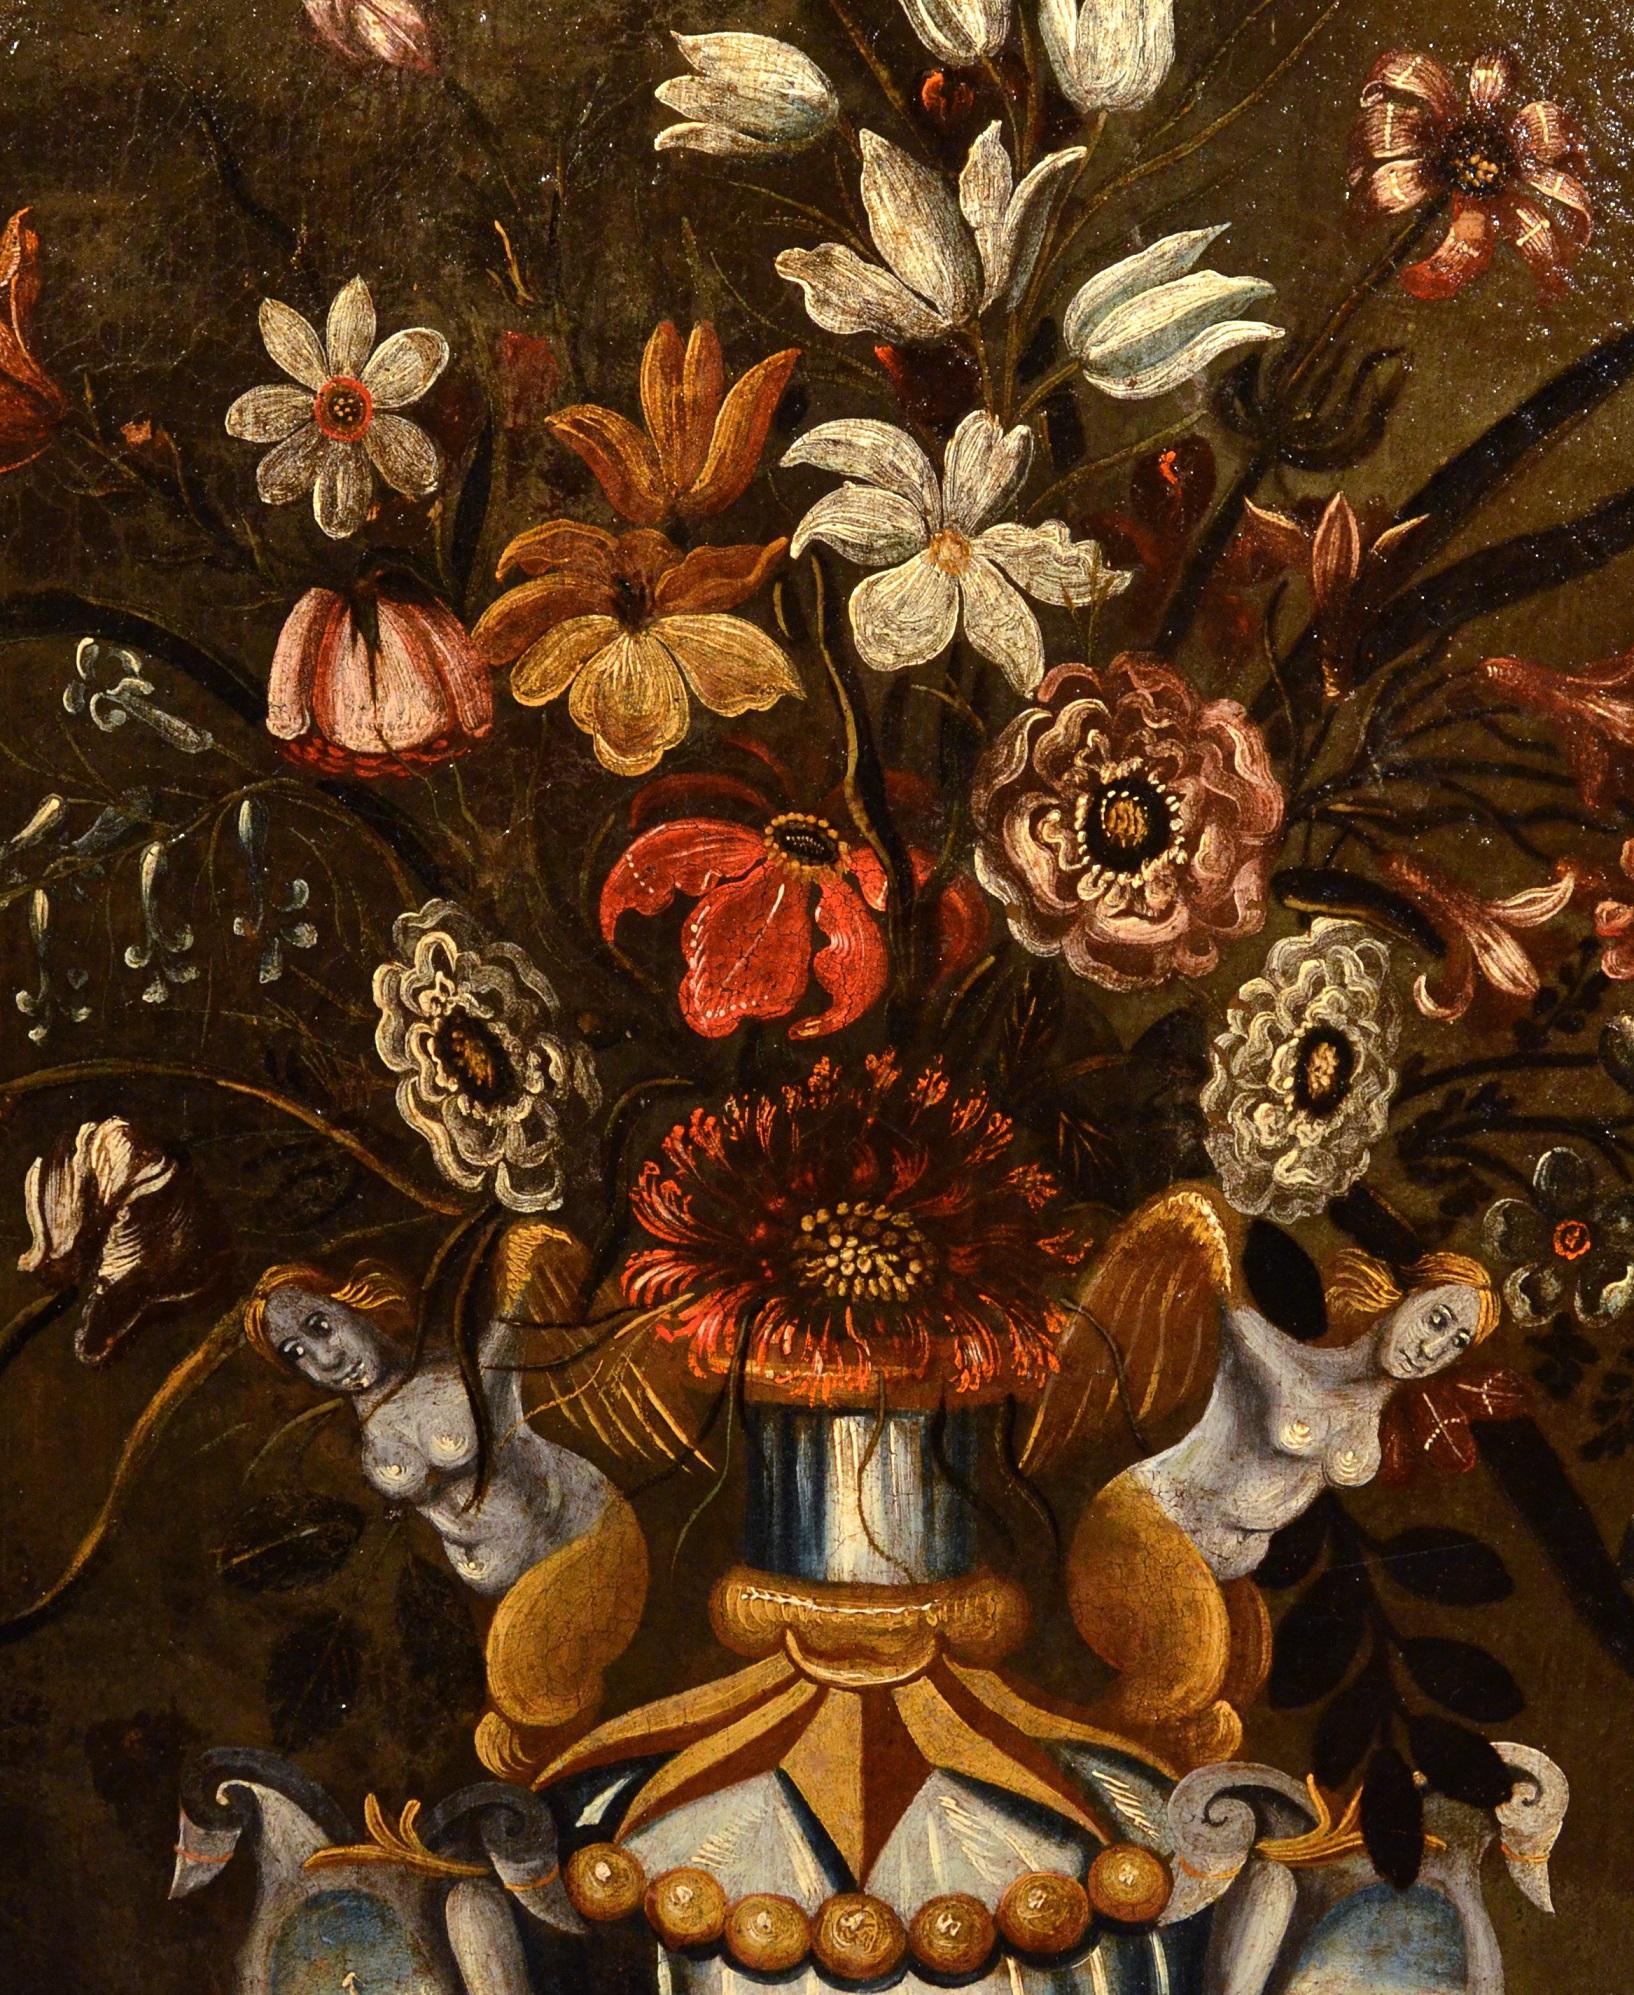 Master of the Grotesque Vase (active in Rome and Naples in the first quarter of the 17th century)
Still life of flowers in a classic vase

oil on canvas
66 x 51 cm, In frame cm. 82 x 68

In this sumptuous still life we ​​see a precious classical